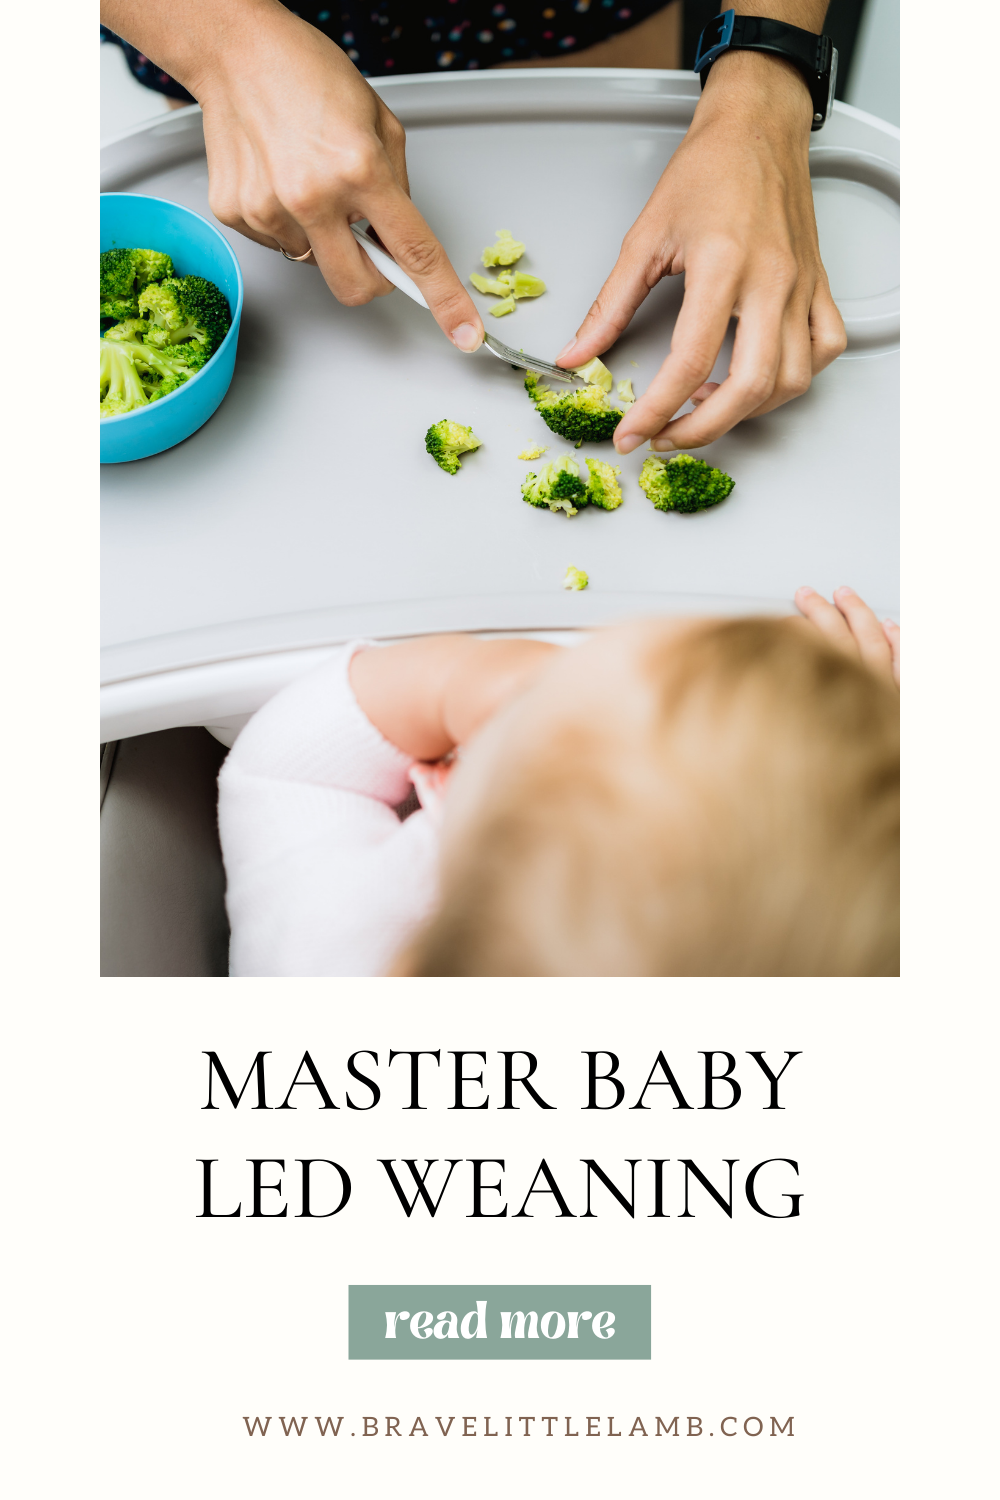 How to Master Baby Led Weaning